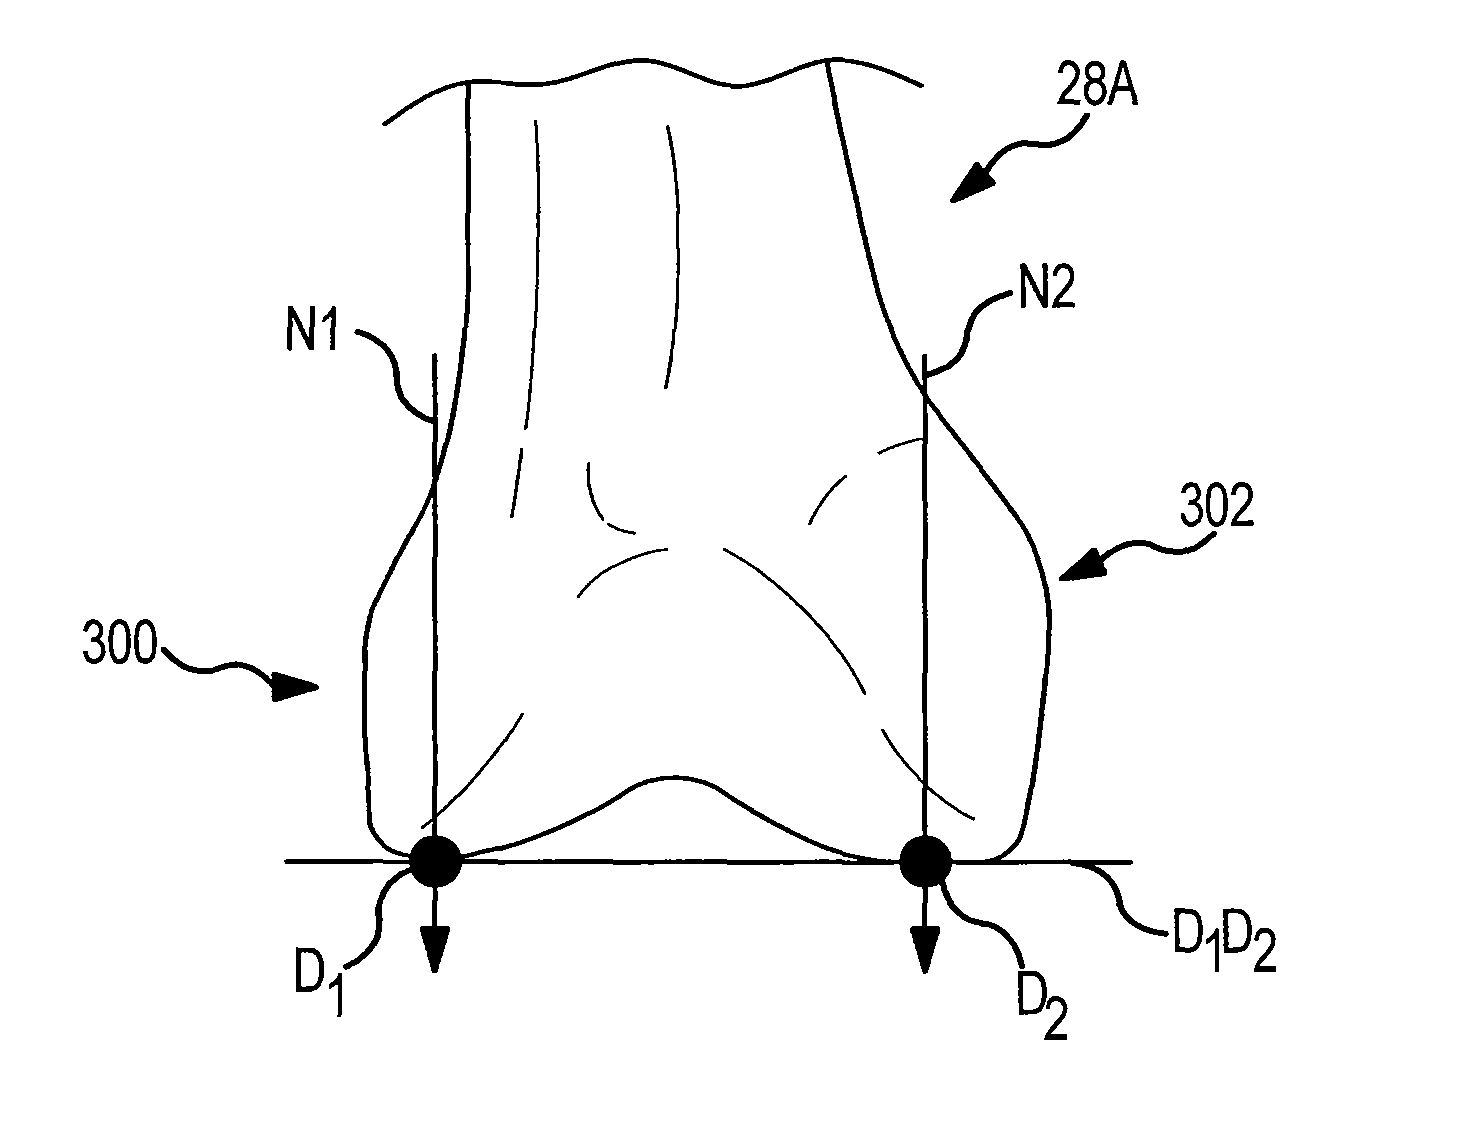 Generation of a computerized bone model representative of a pre-degenerated state and useable in the design and manufacture of arthroplasty devices